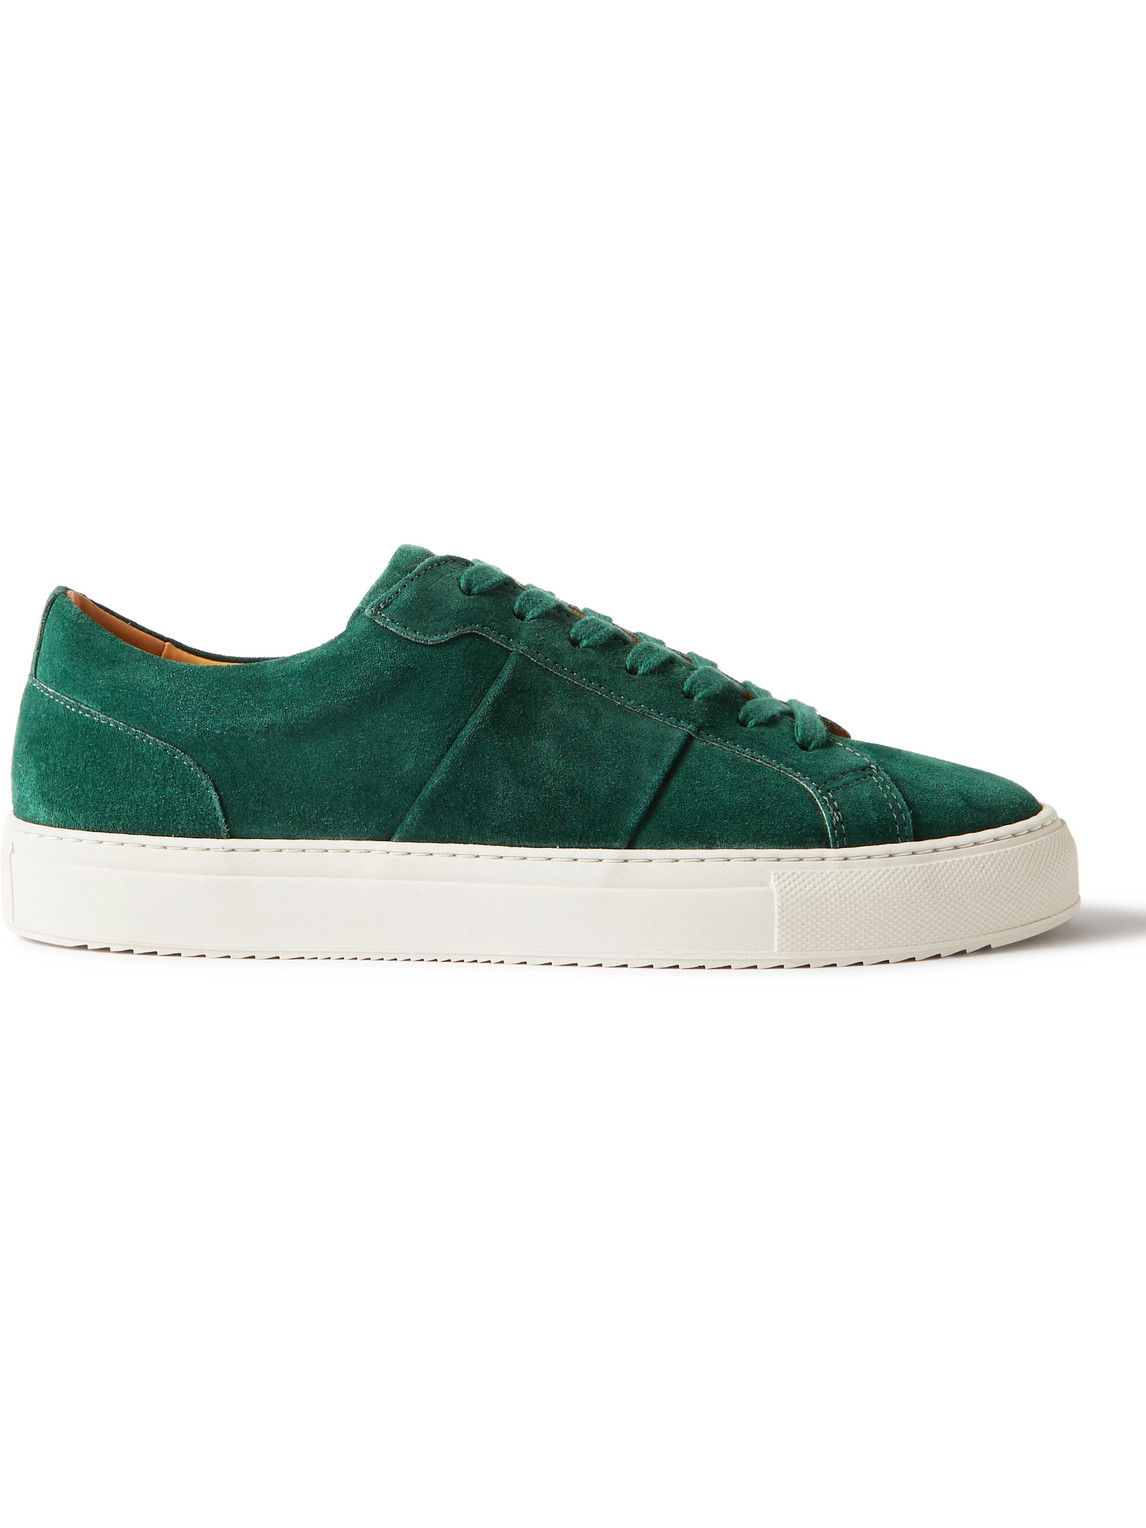 Mr P Alec Regenerated Suede By Evolo® Trainers In Green